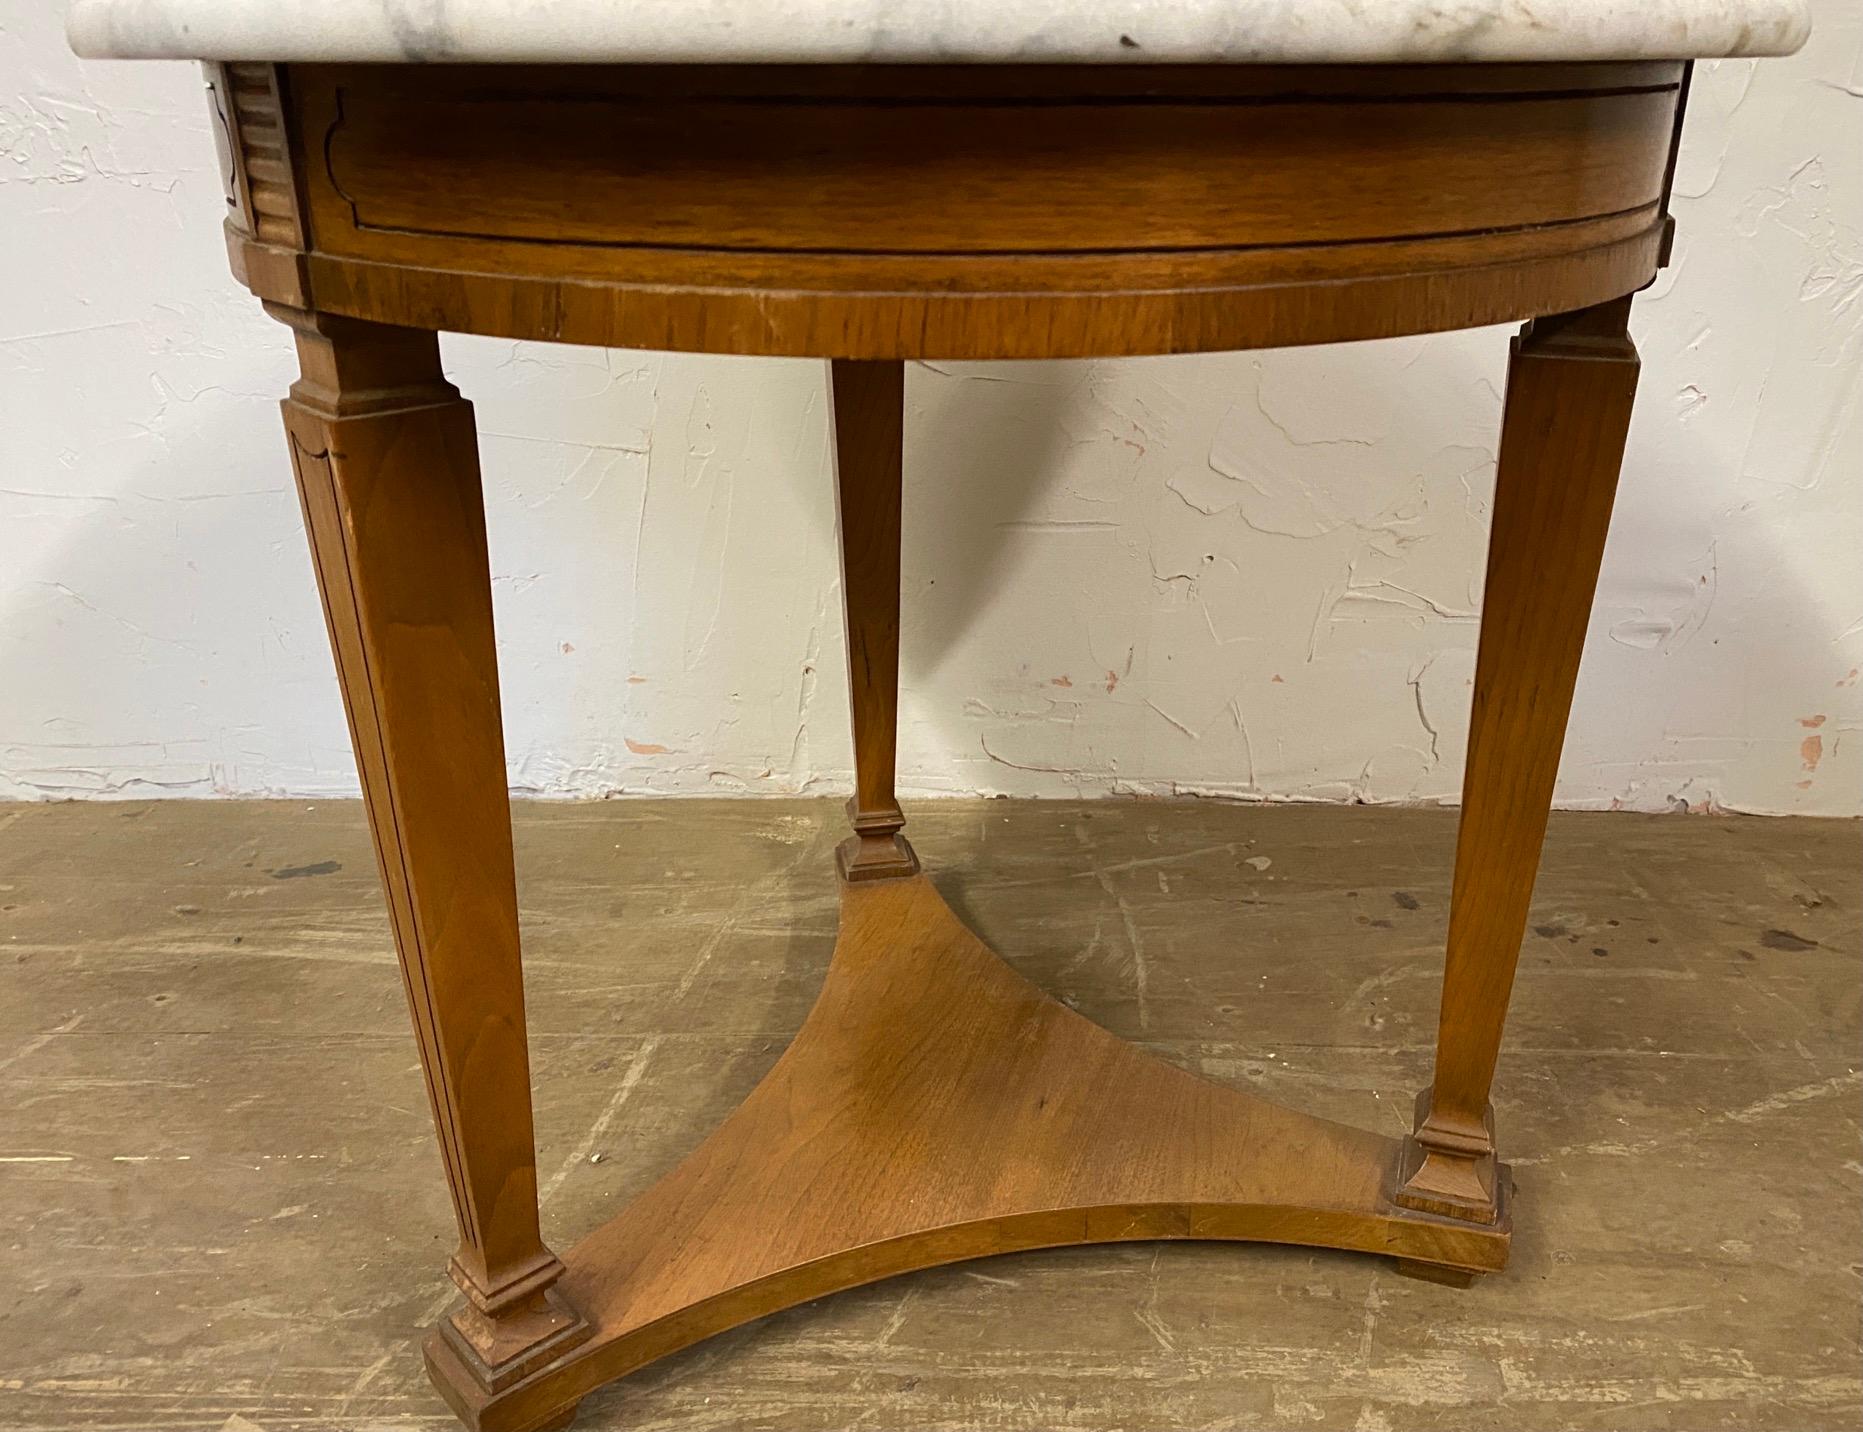 Round Regency style table having a 3 sided triangular stretcher between tapered tripod legs, a beautiful white marble top, and bronze decorative mounts.
End table, round occasioned table, side table, Hollywood Regency.
 